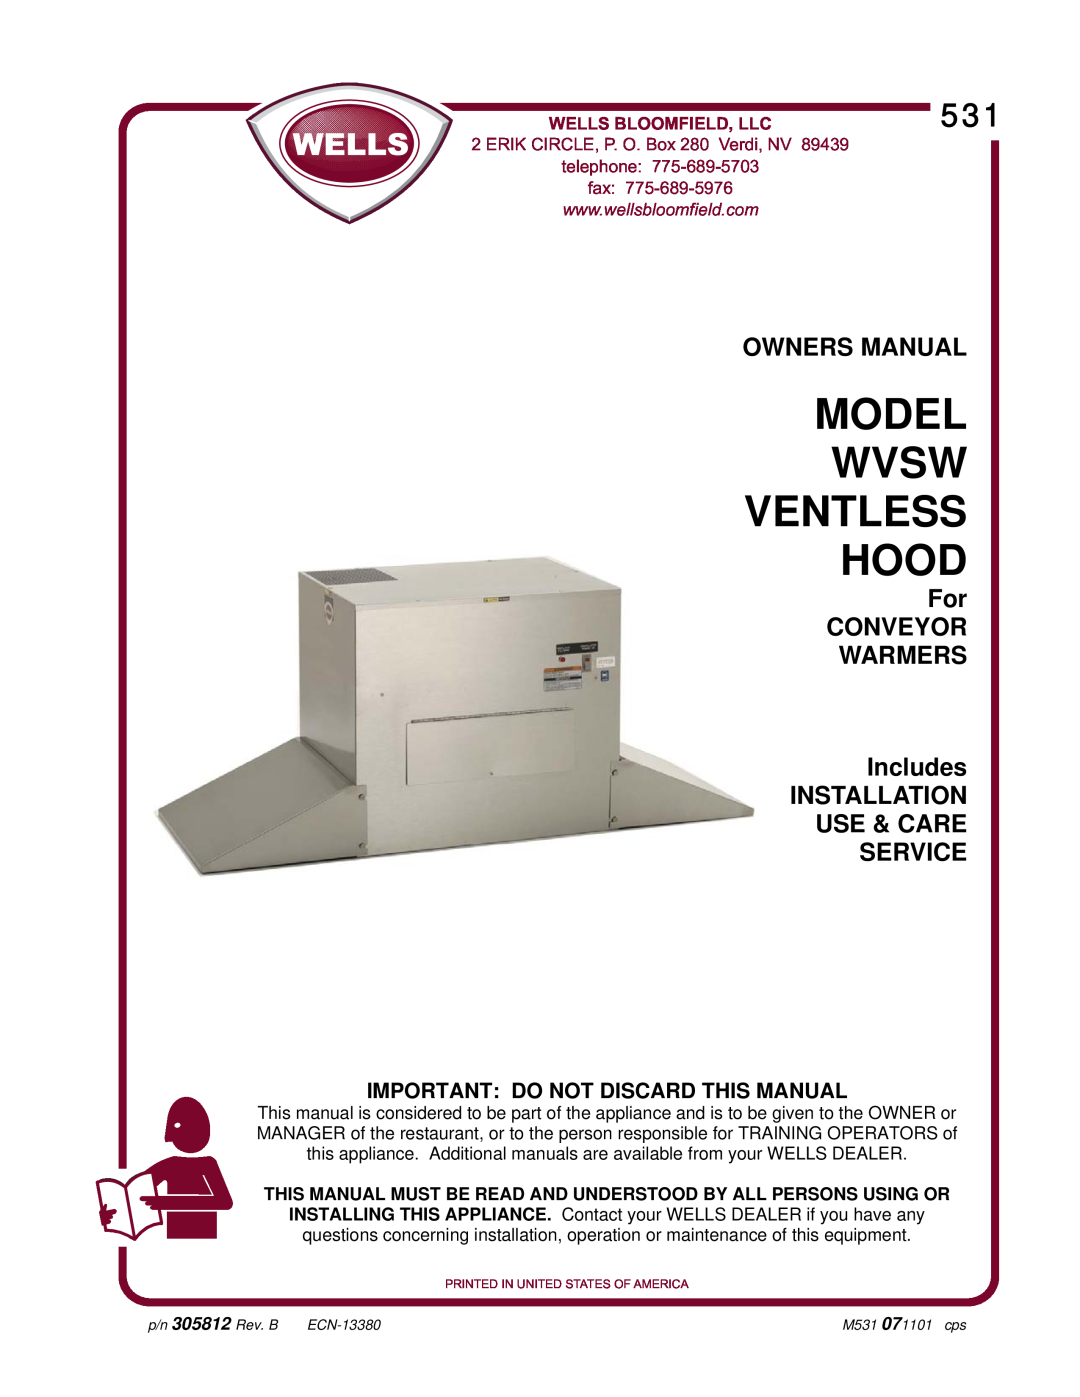 Wells WVSW VENTLESS HOOD owner manual Important Do Not Discard This Manual, Wells Bloomfield, Llc, fax, Use & Care Service 